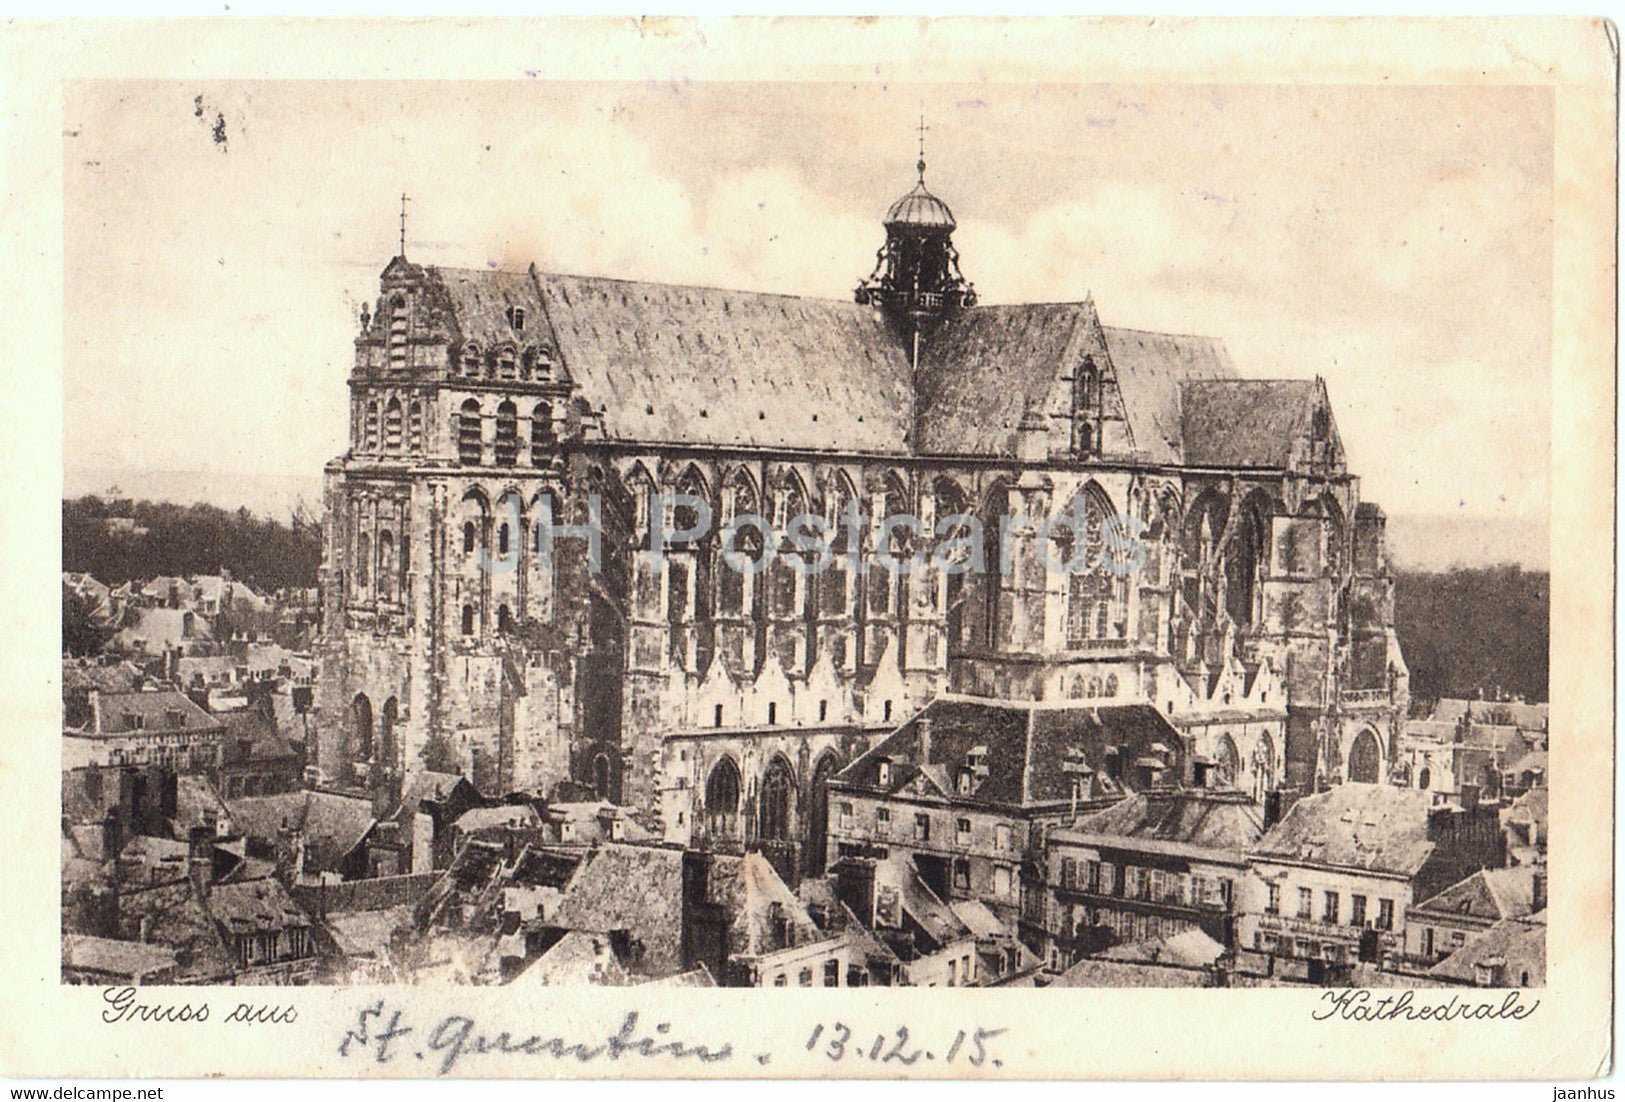 Gruss aus St Quentin - Kathedrale - cathedral - Feldpost - old postcard - 1915 - France - used - JH Postcards